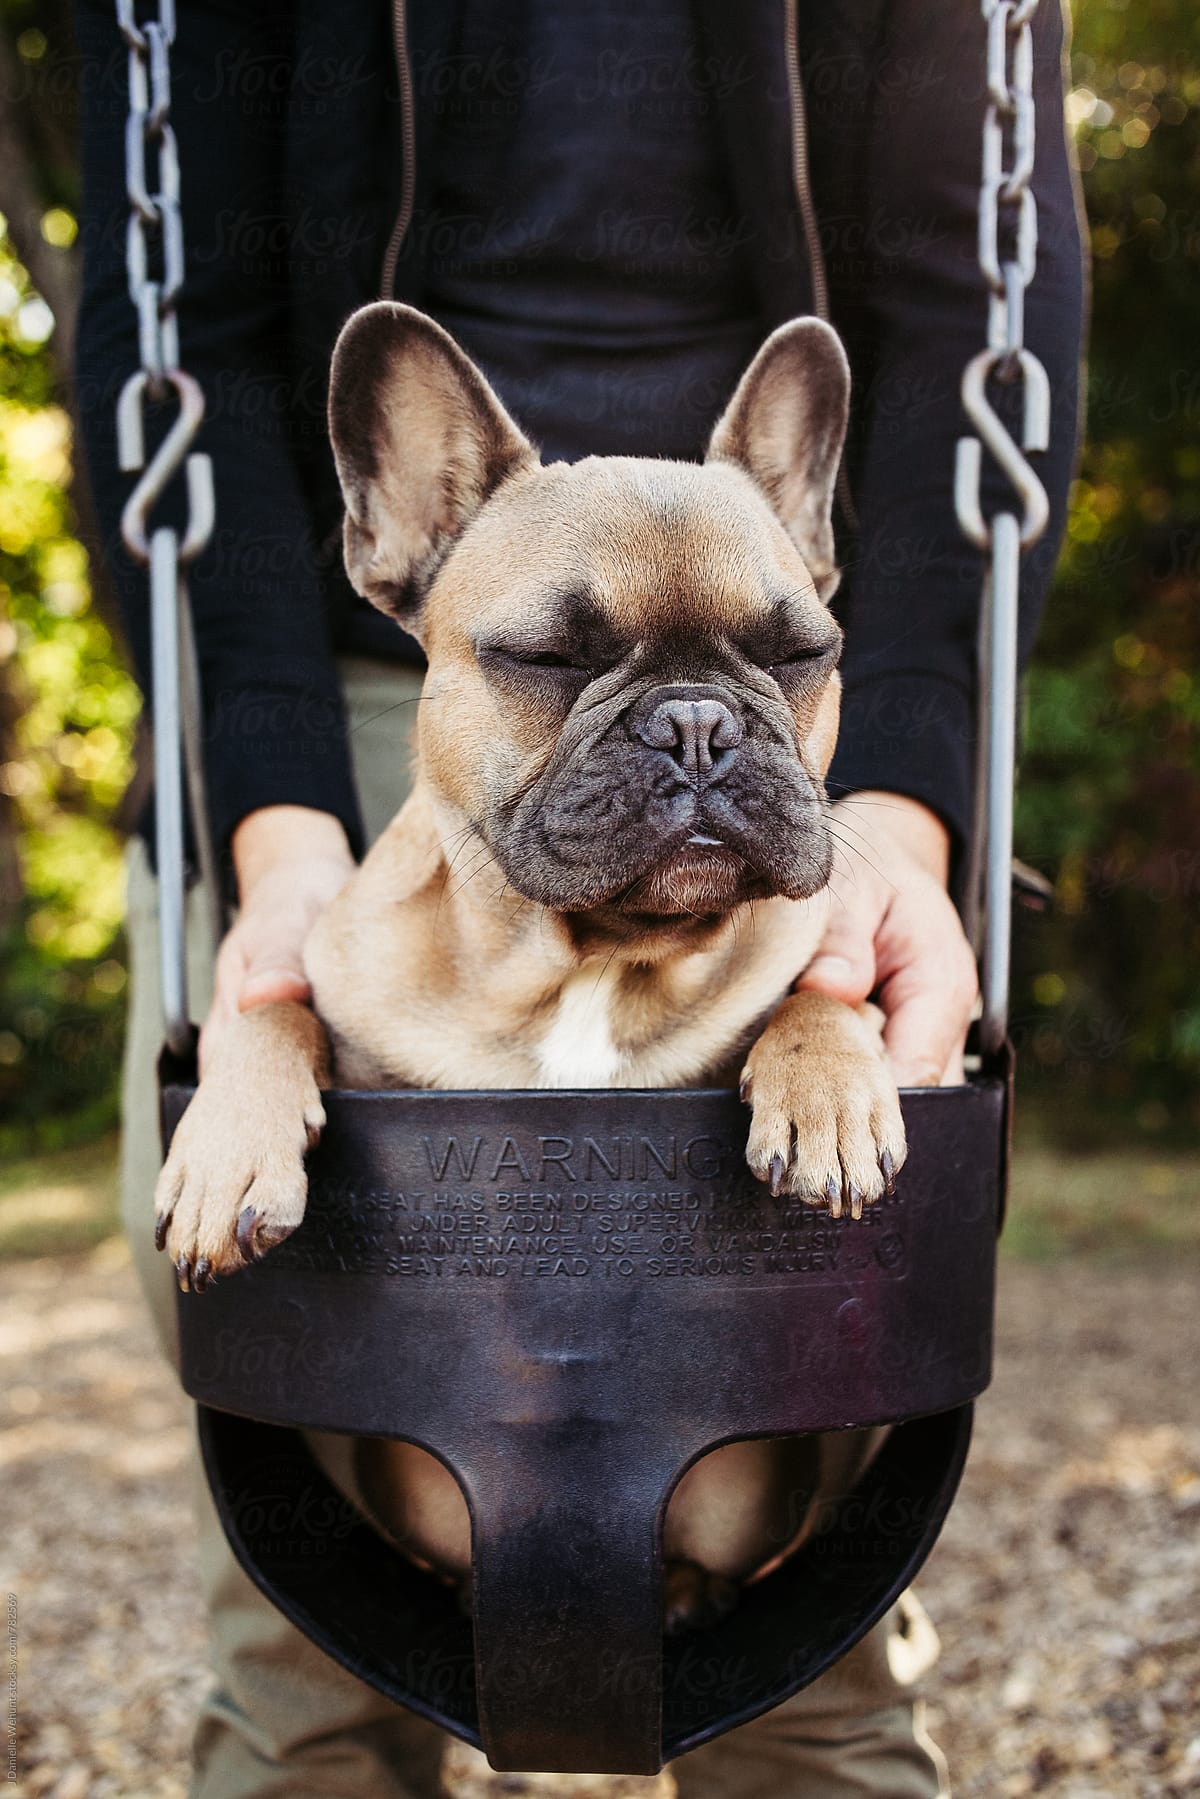 A brown french bulldog puppy swinging in a baby swing at